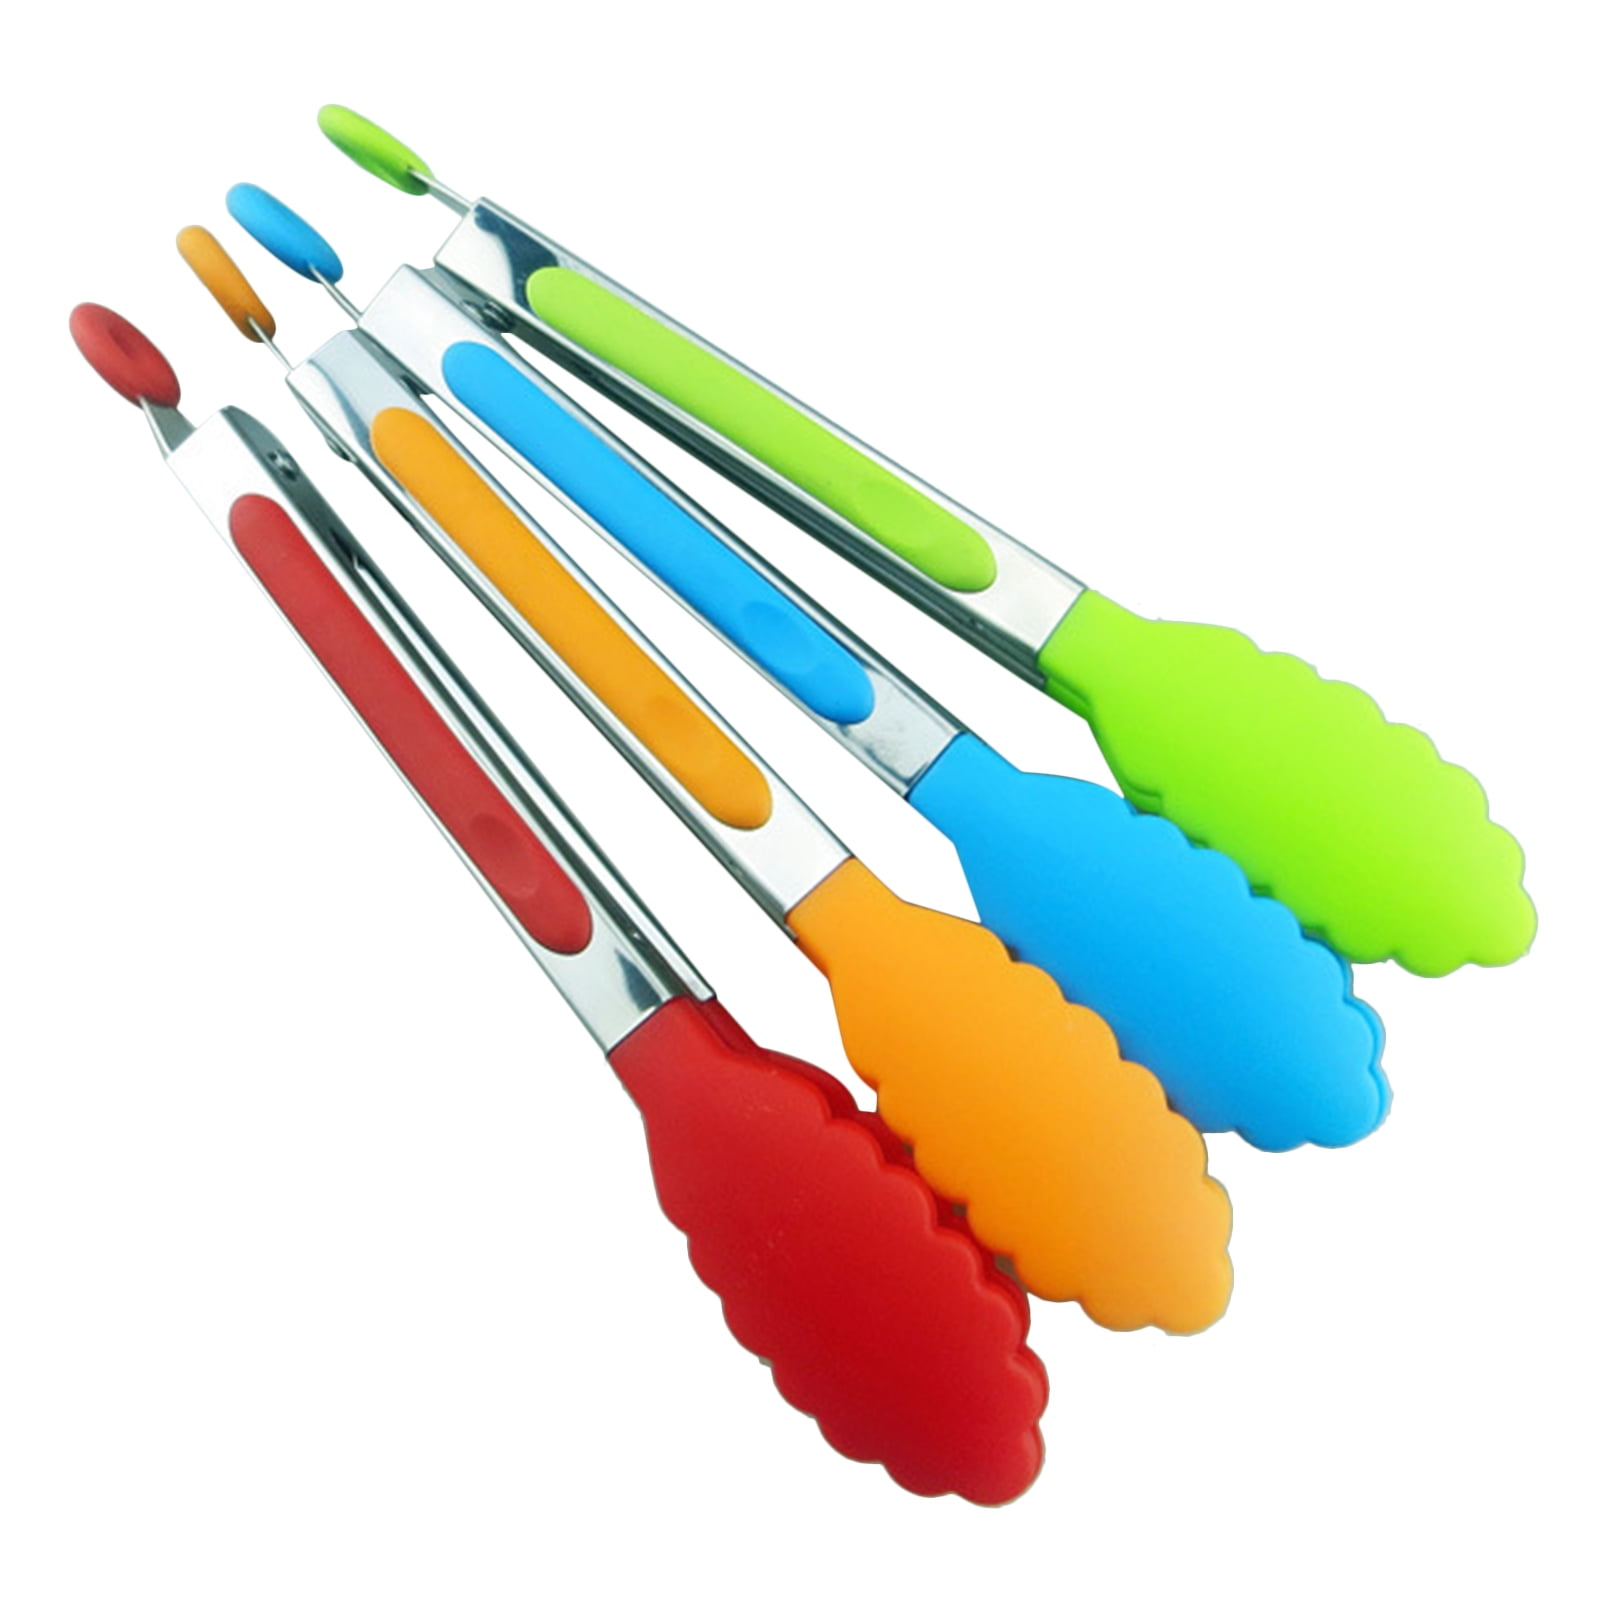 7/9/12 Inches Kitchen Tongs Set of 3 with Silicone Tips | U-Taste Purple / 16 inch